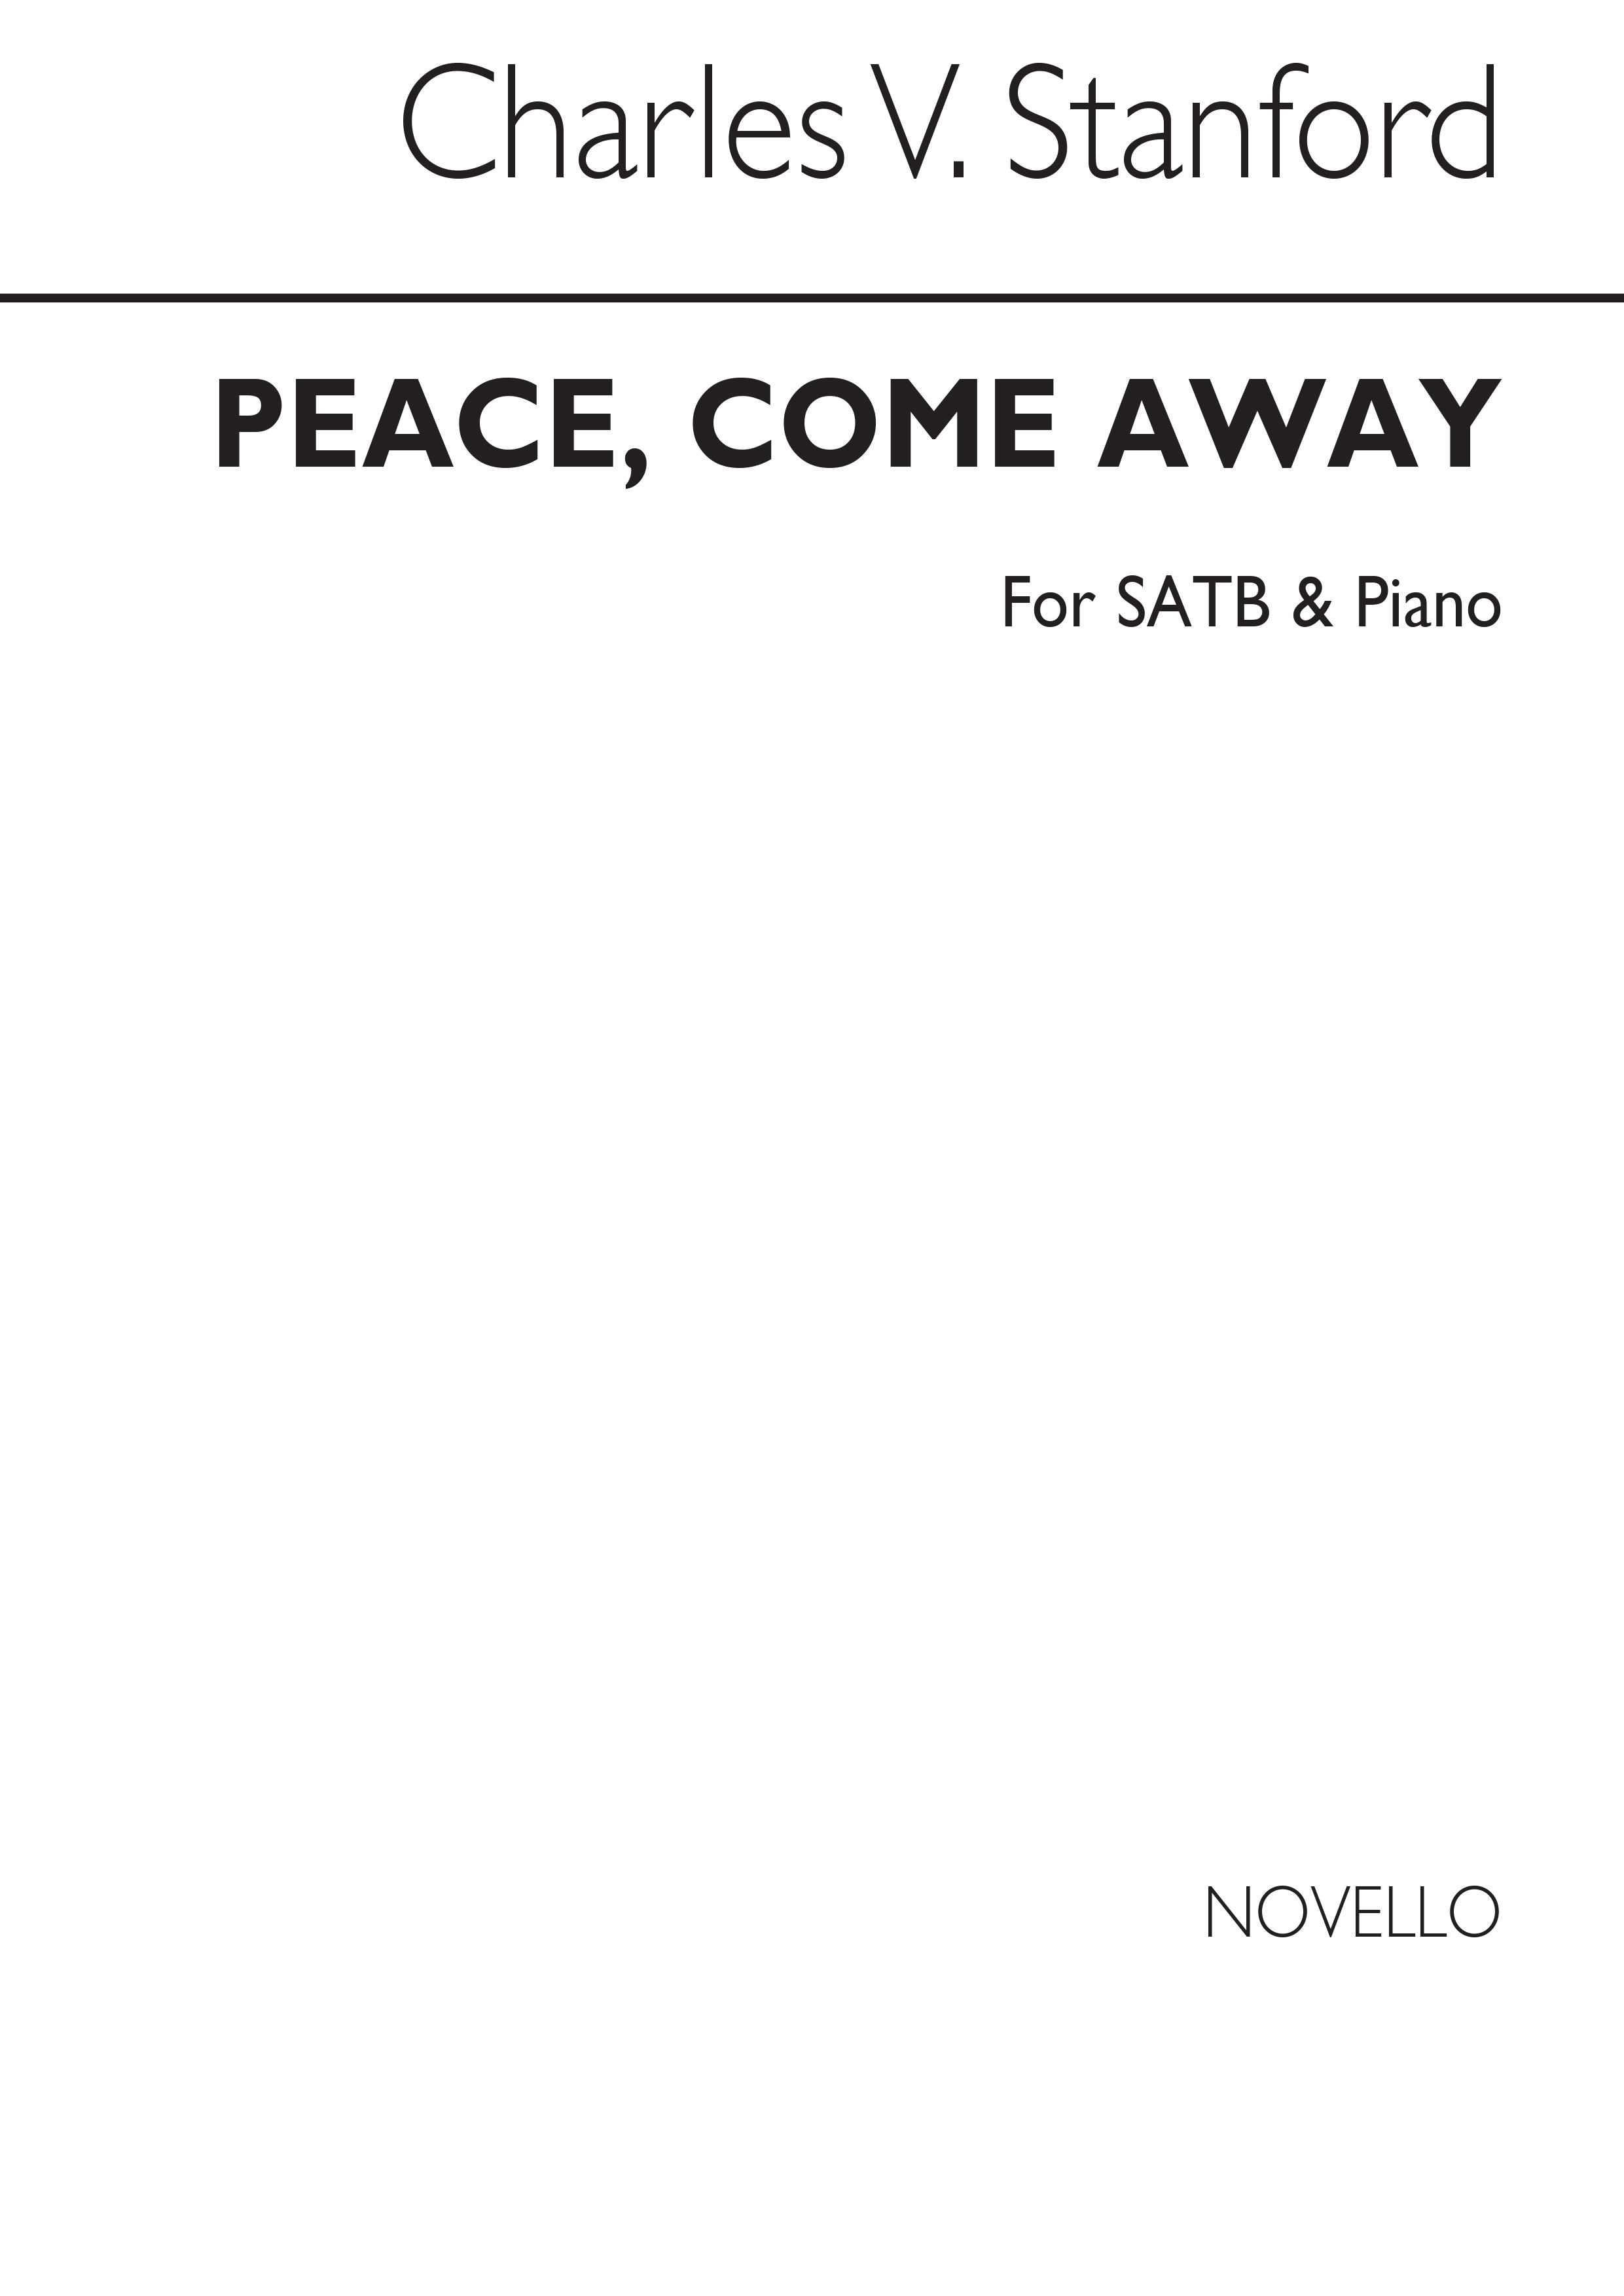 Charles Villiers Stanford: Peace Come Away: SATB: Vocal Album